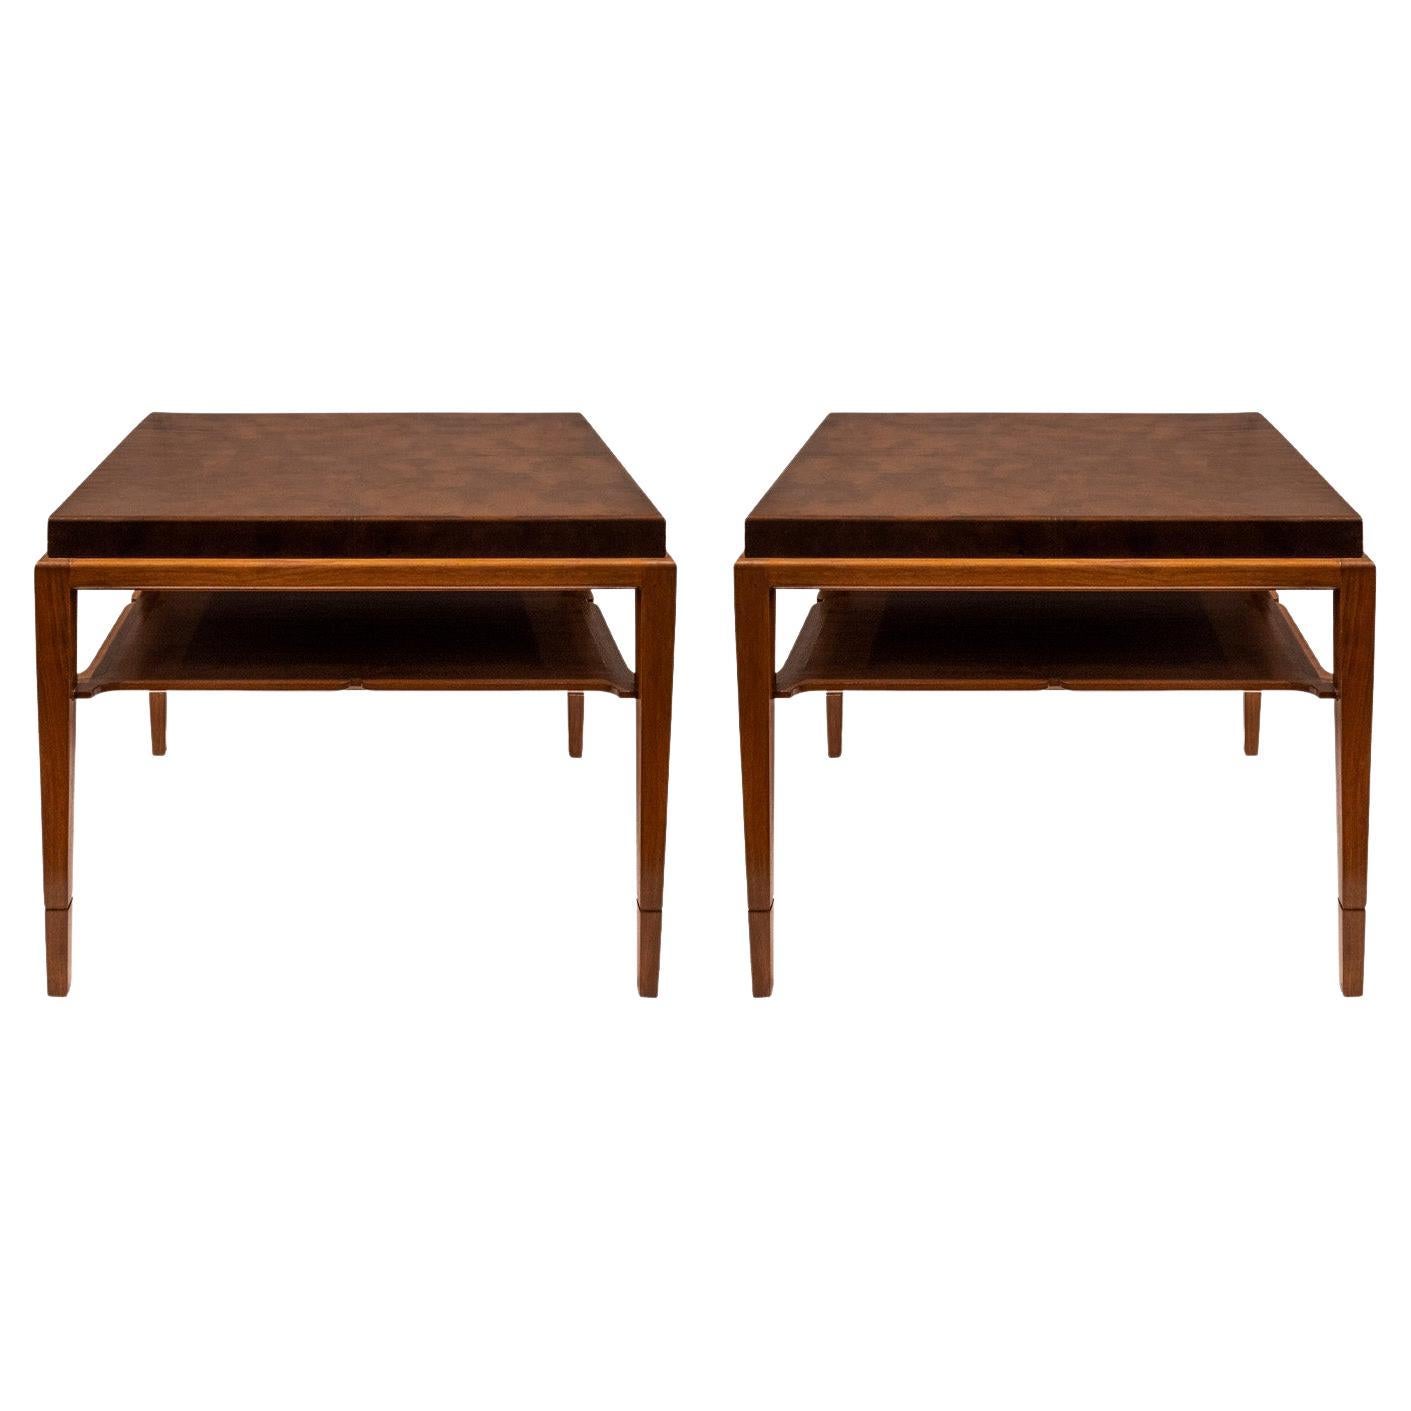 Tommi Parzinger Finely Crafted Pair of Mahogany Tables with Leather Tops 1940s For Sale